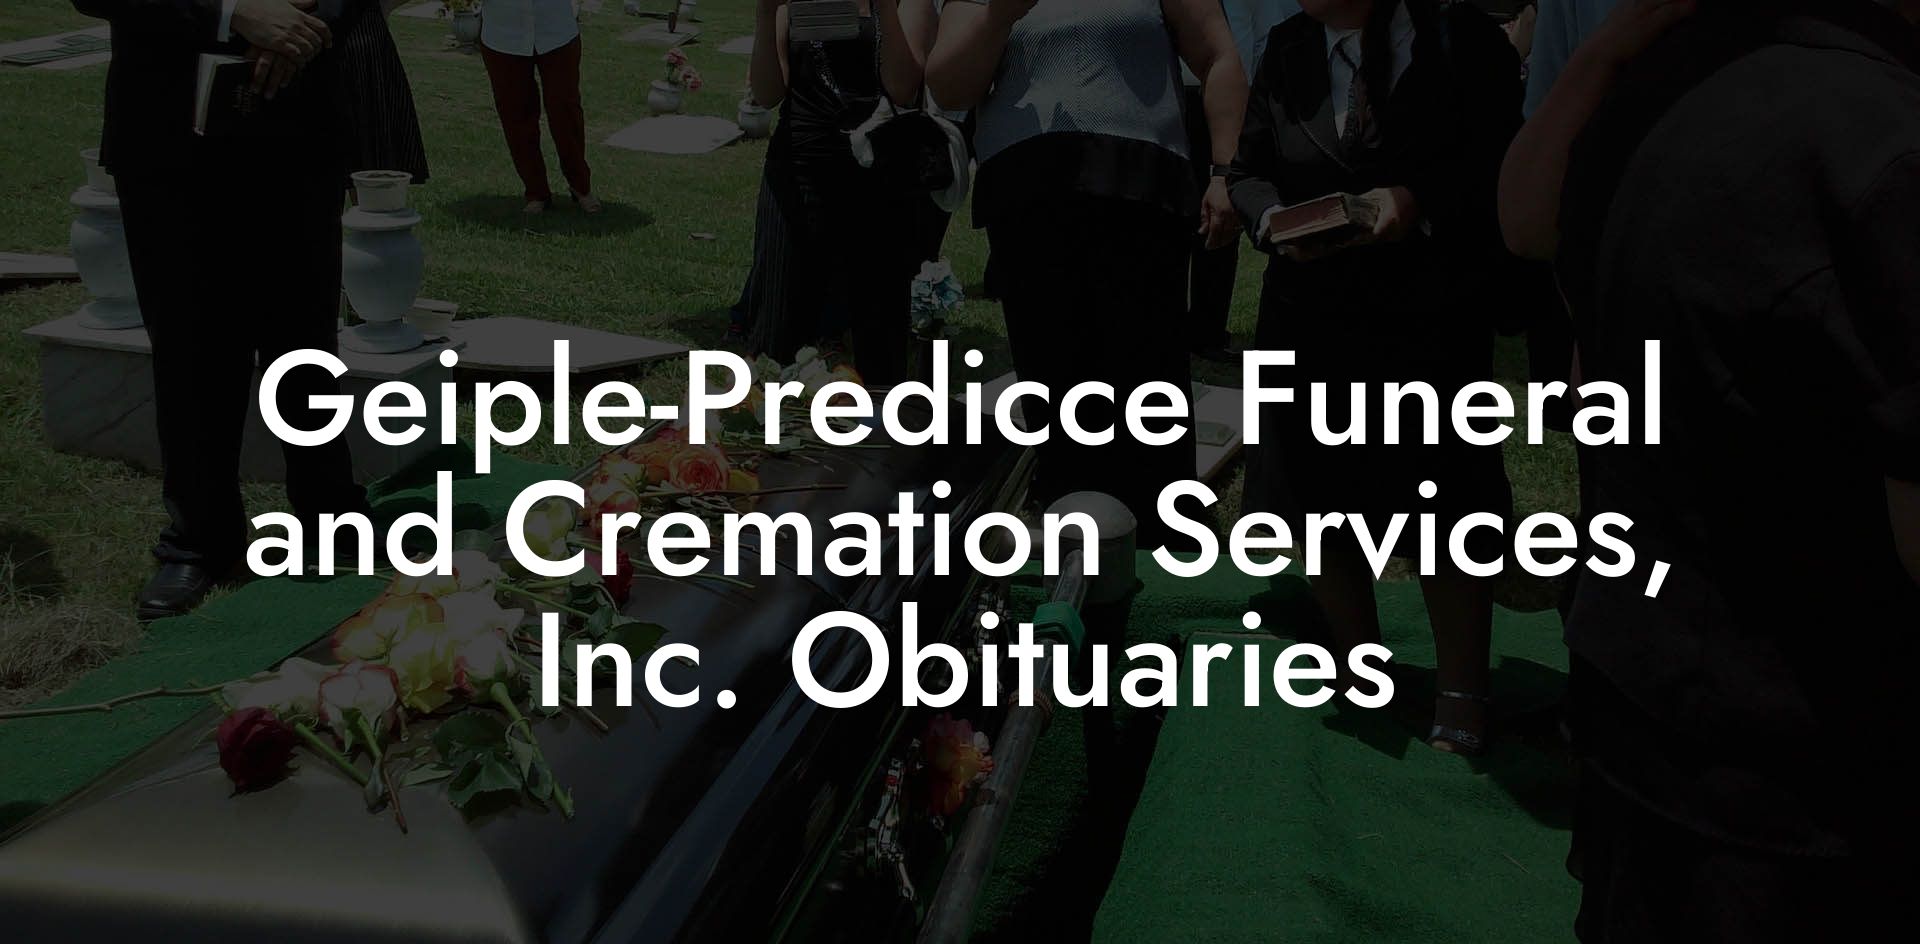 Geiple-Predicce Funeral and Cremation Services, Inc. Obituaries